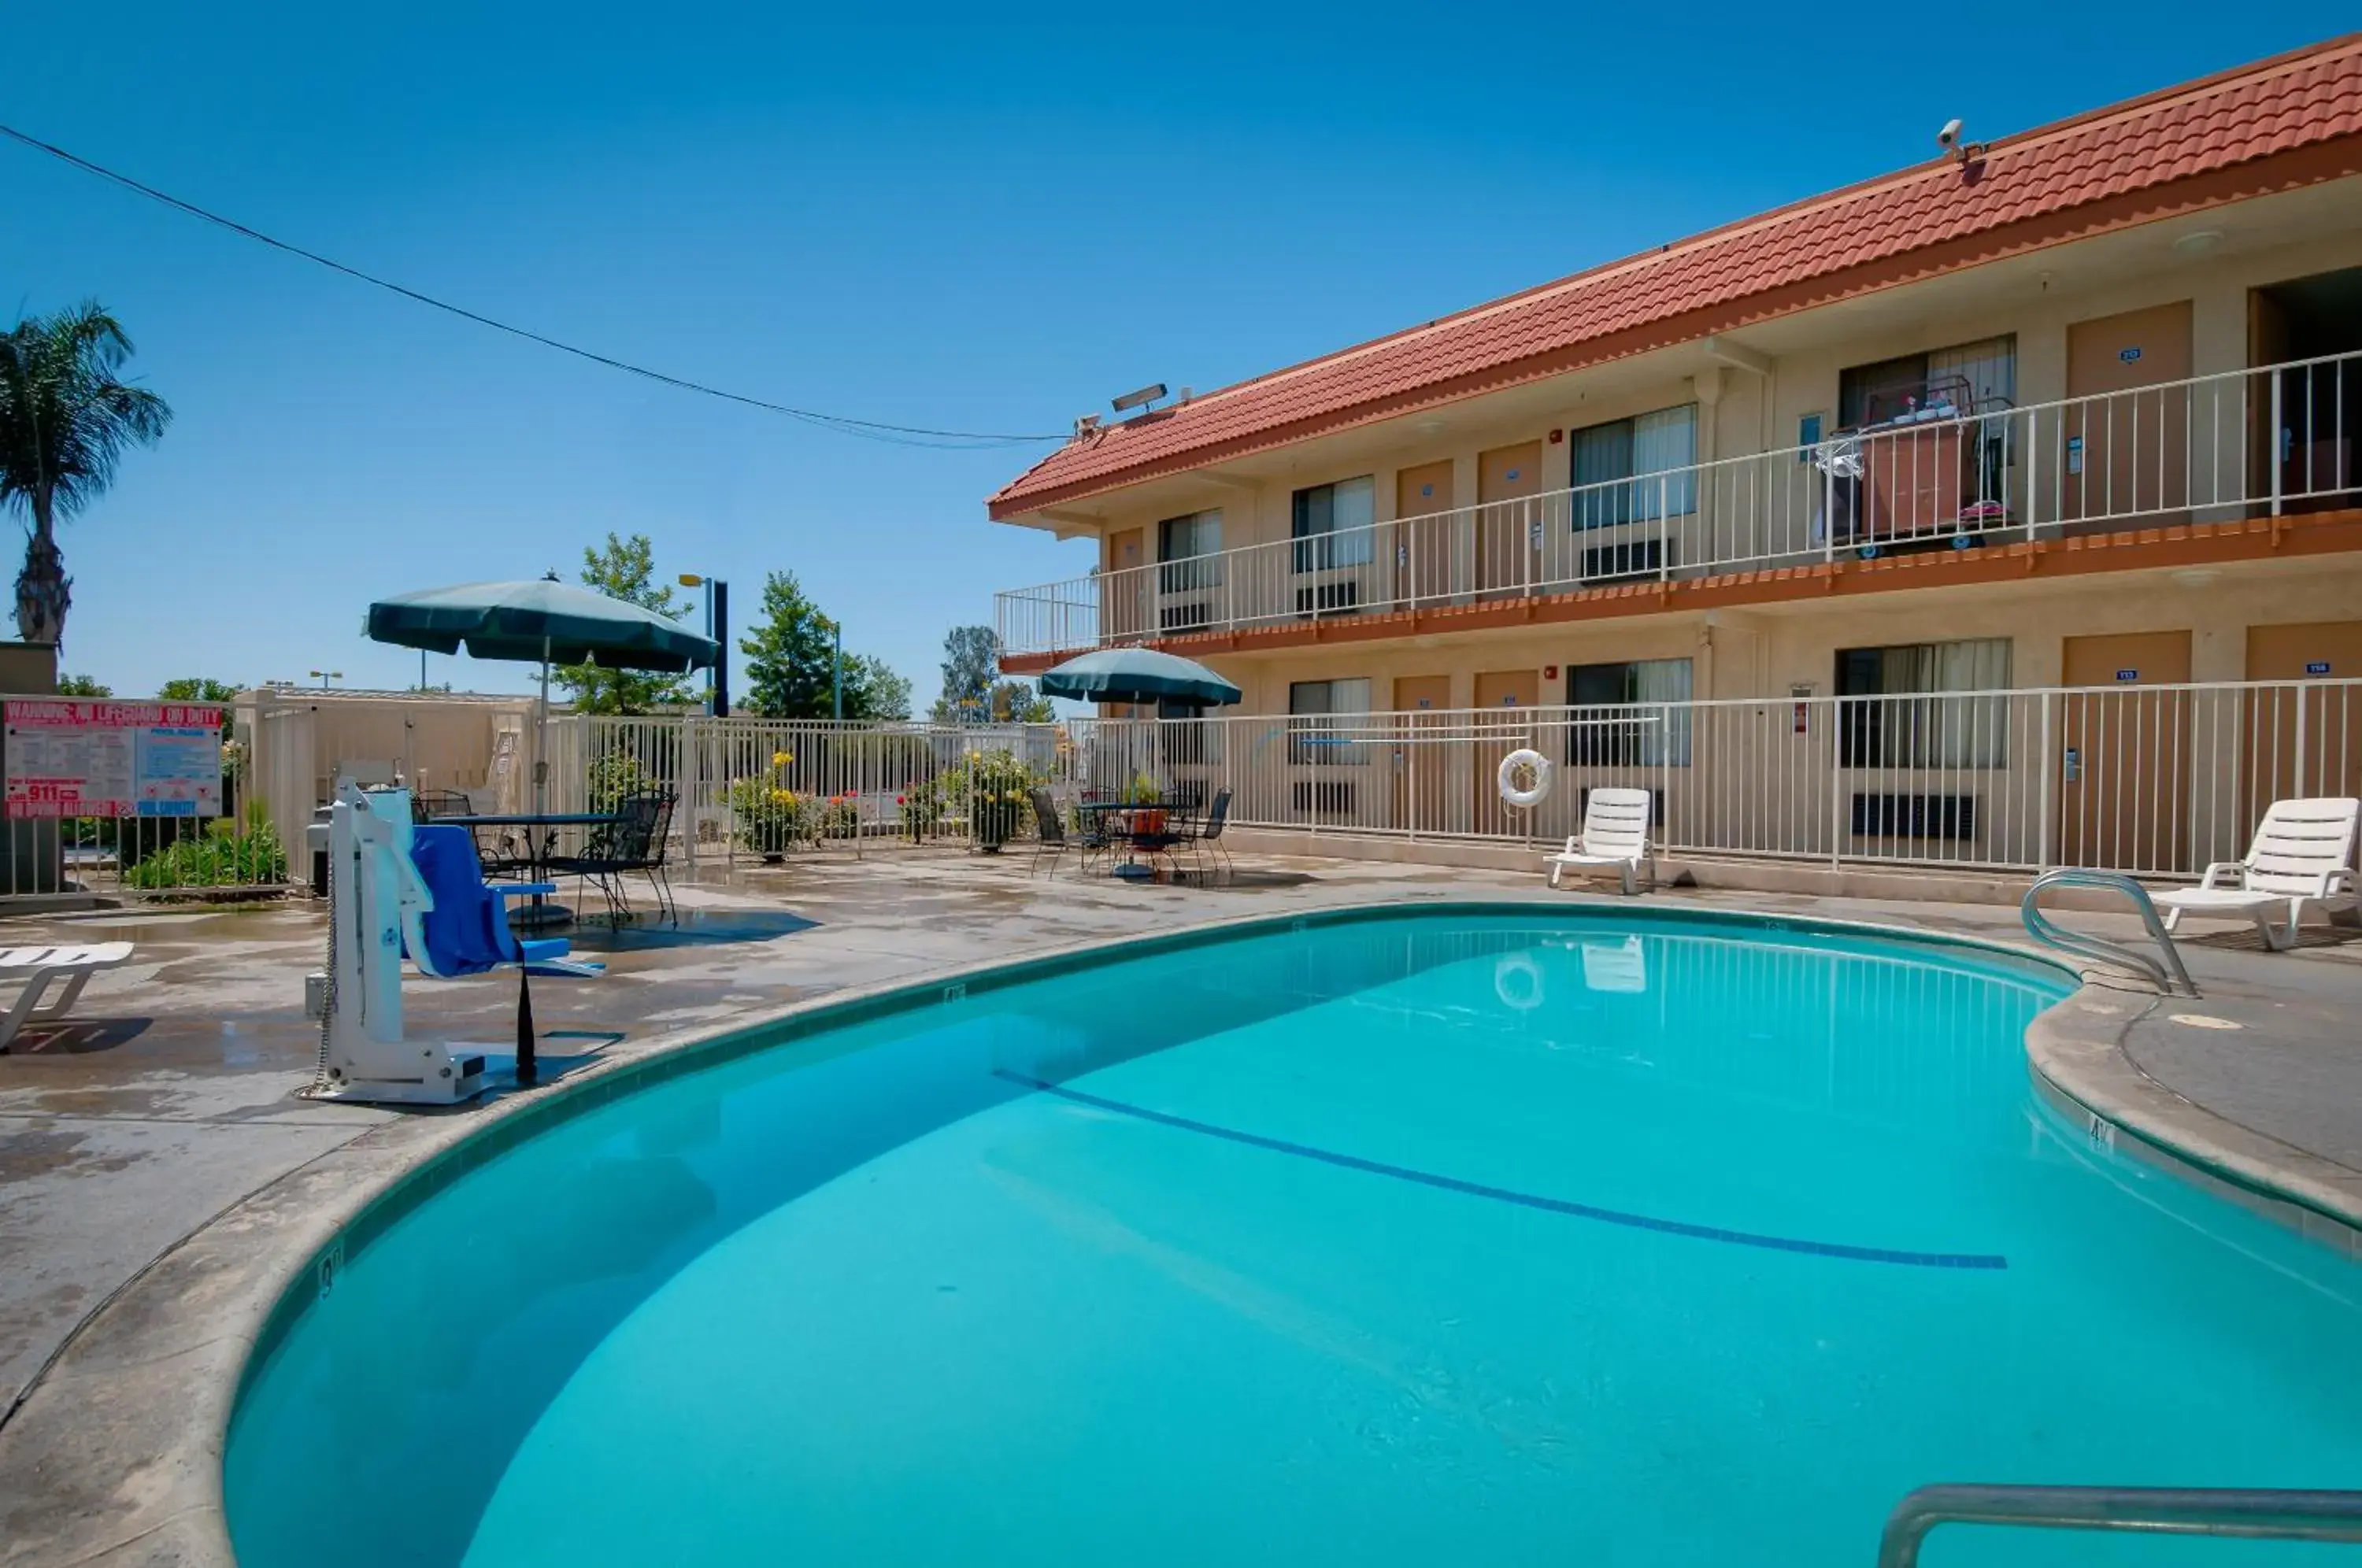 Swimming pool, Property Building in Vagabond Inn Bakersfield South